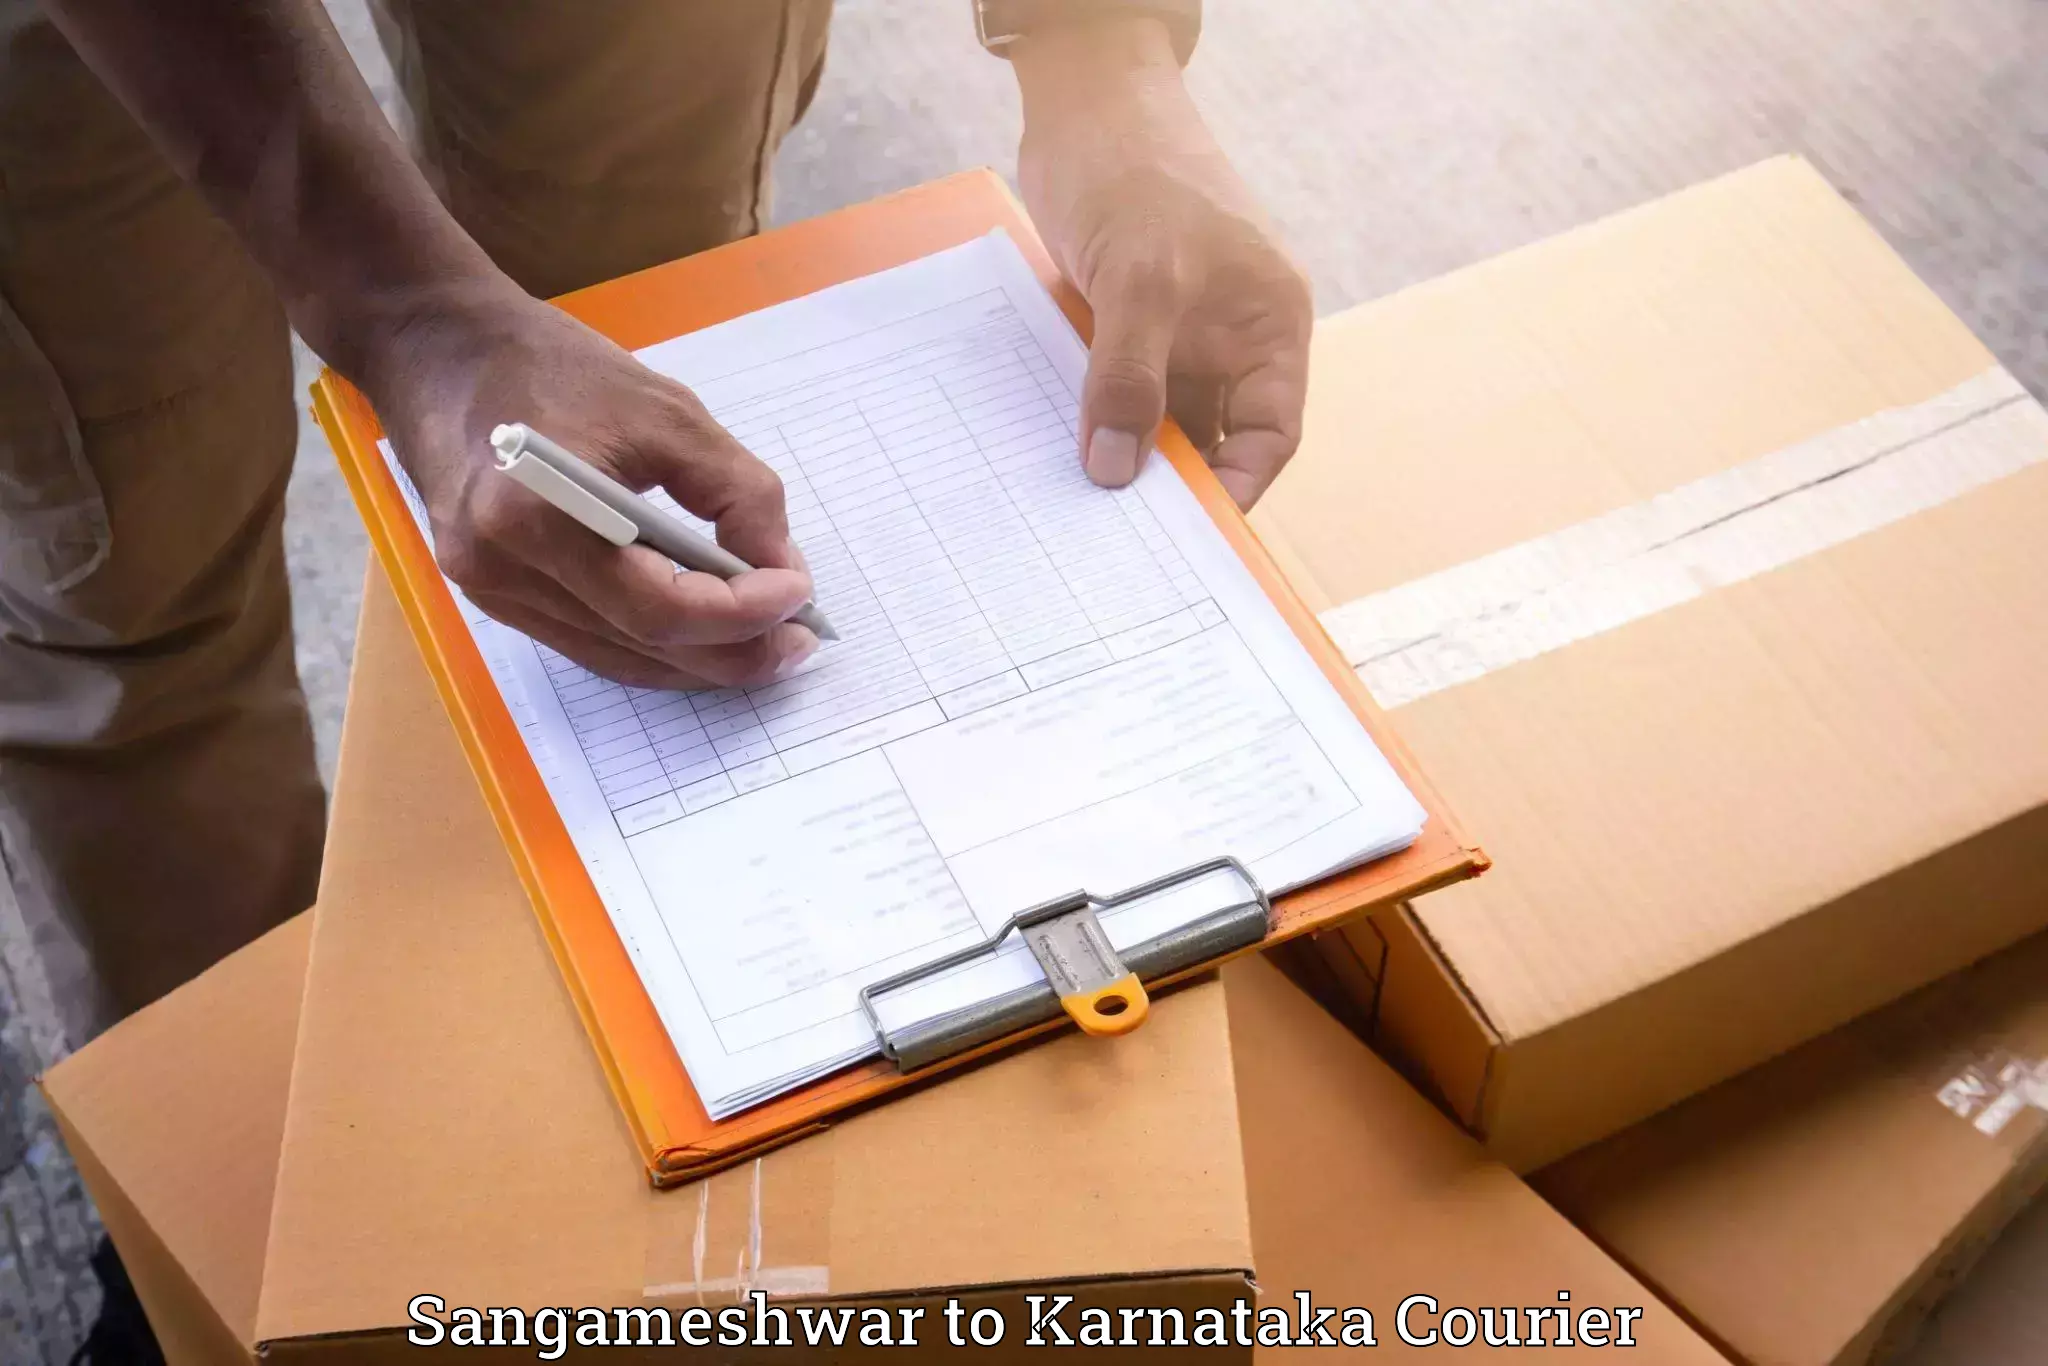 Moving and storage services in Sangameshwar to Hungund